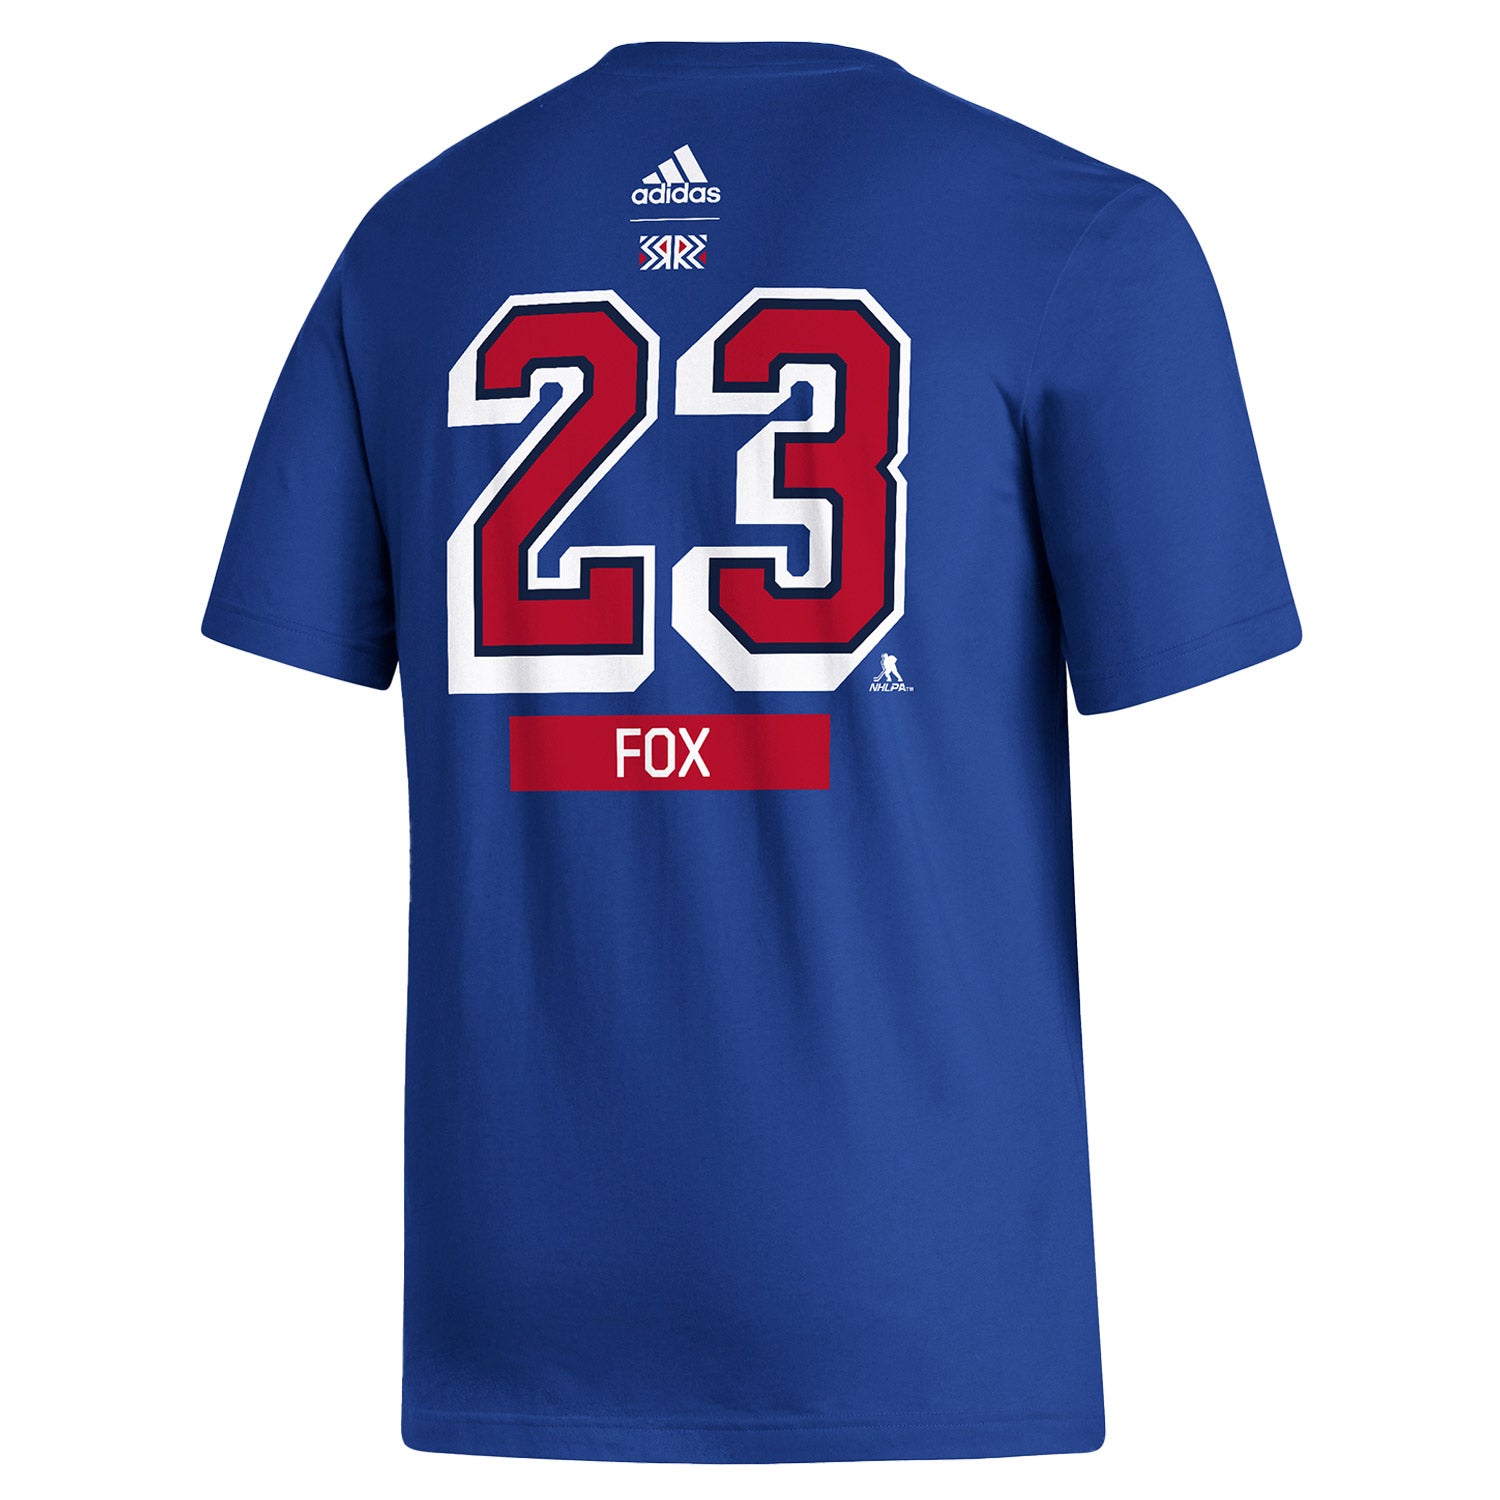 Adidas Adam Fox Reverse Retro 2022 Name & Number Tee In Blue, Red & White - Back View